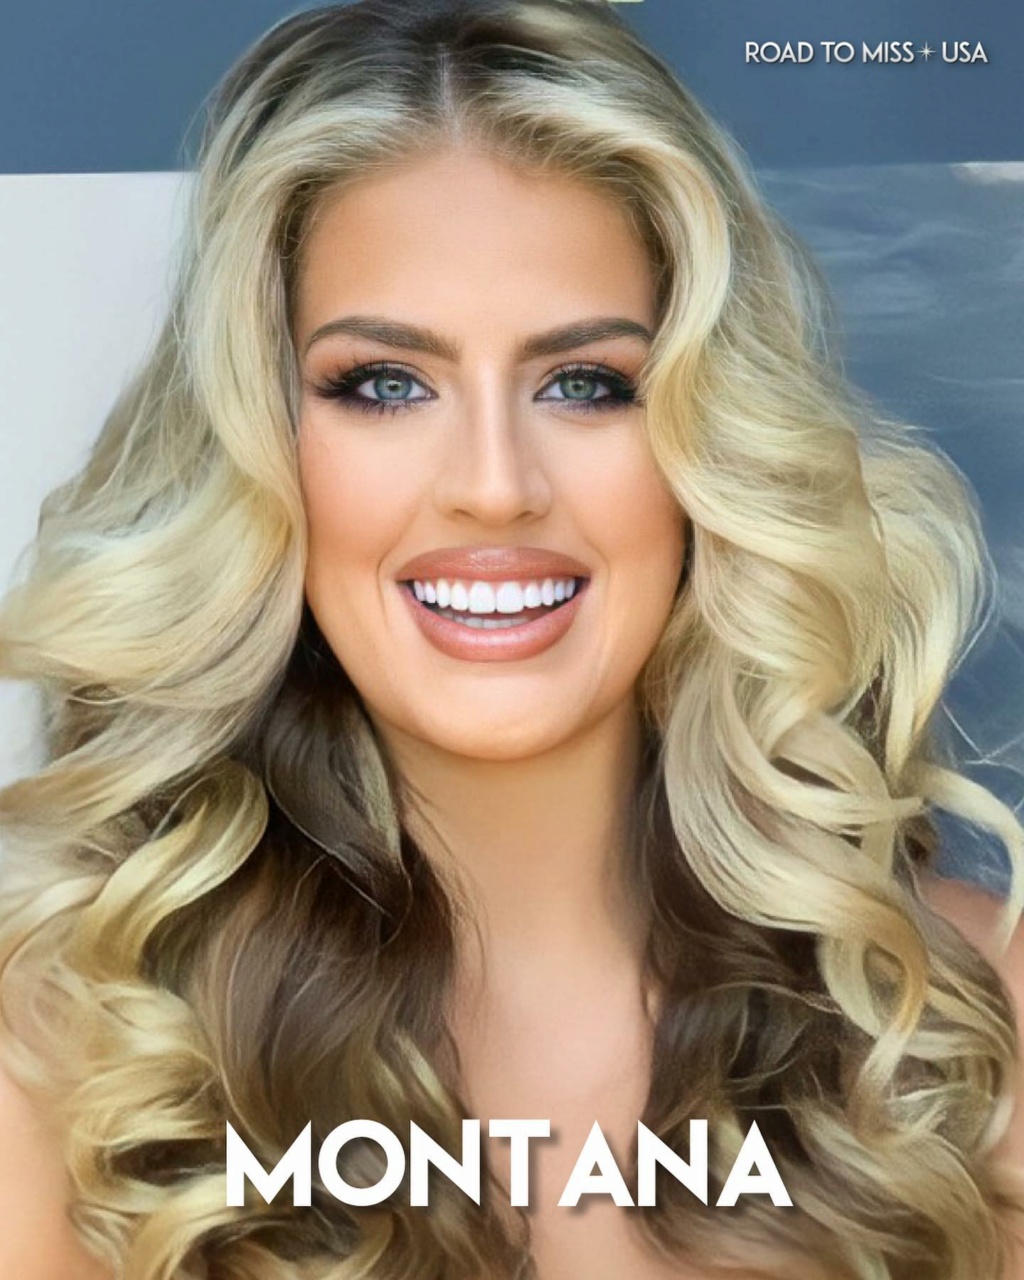 ROAD TO MISS USA 2021 is KENTUCKY! - Page 4 24253410